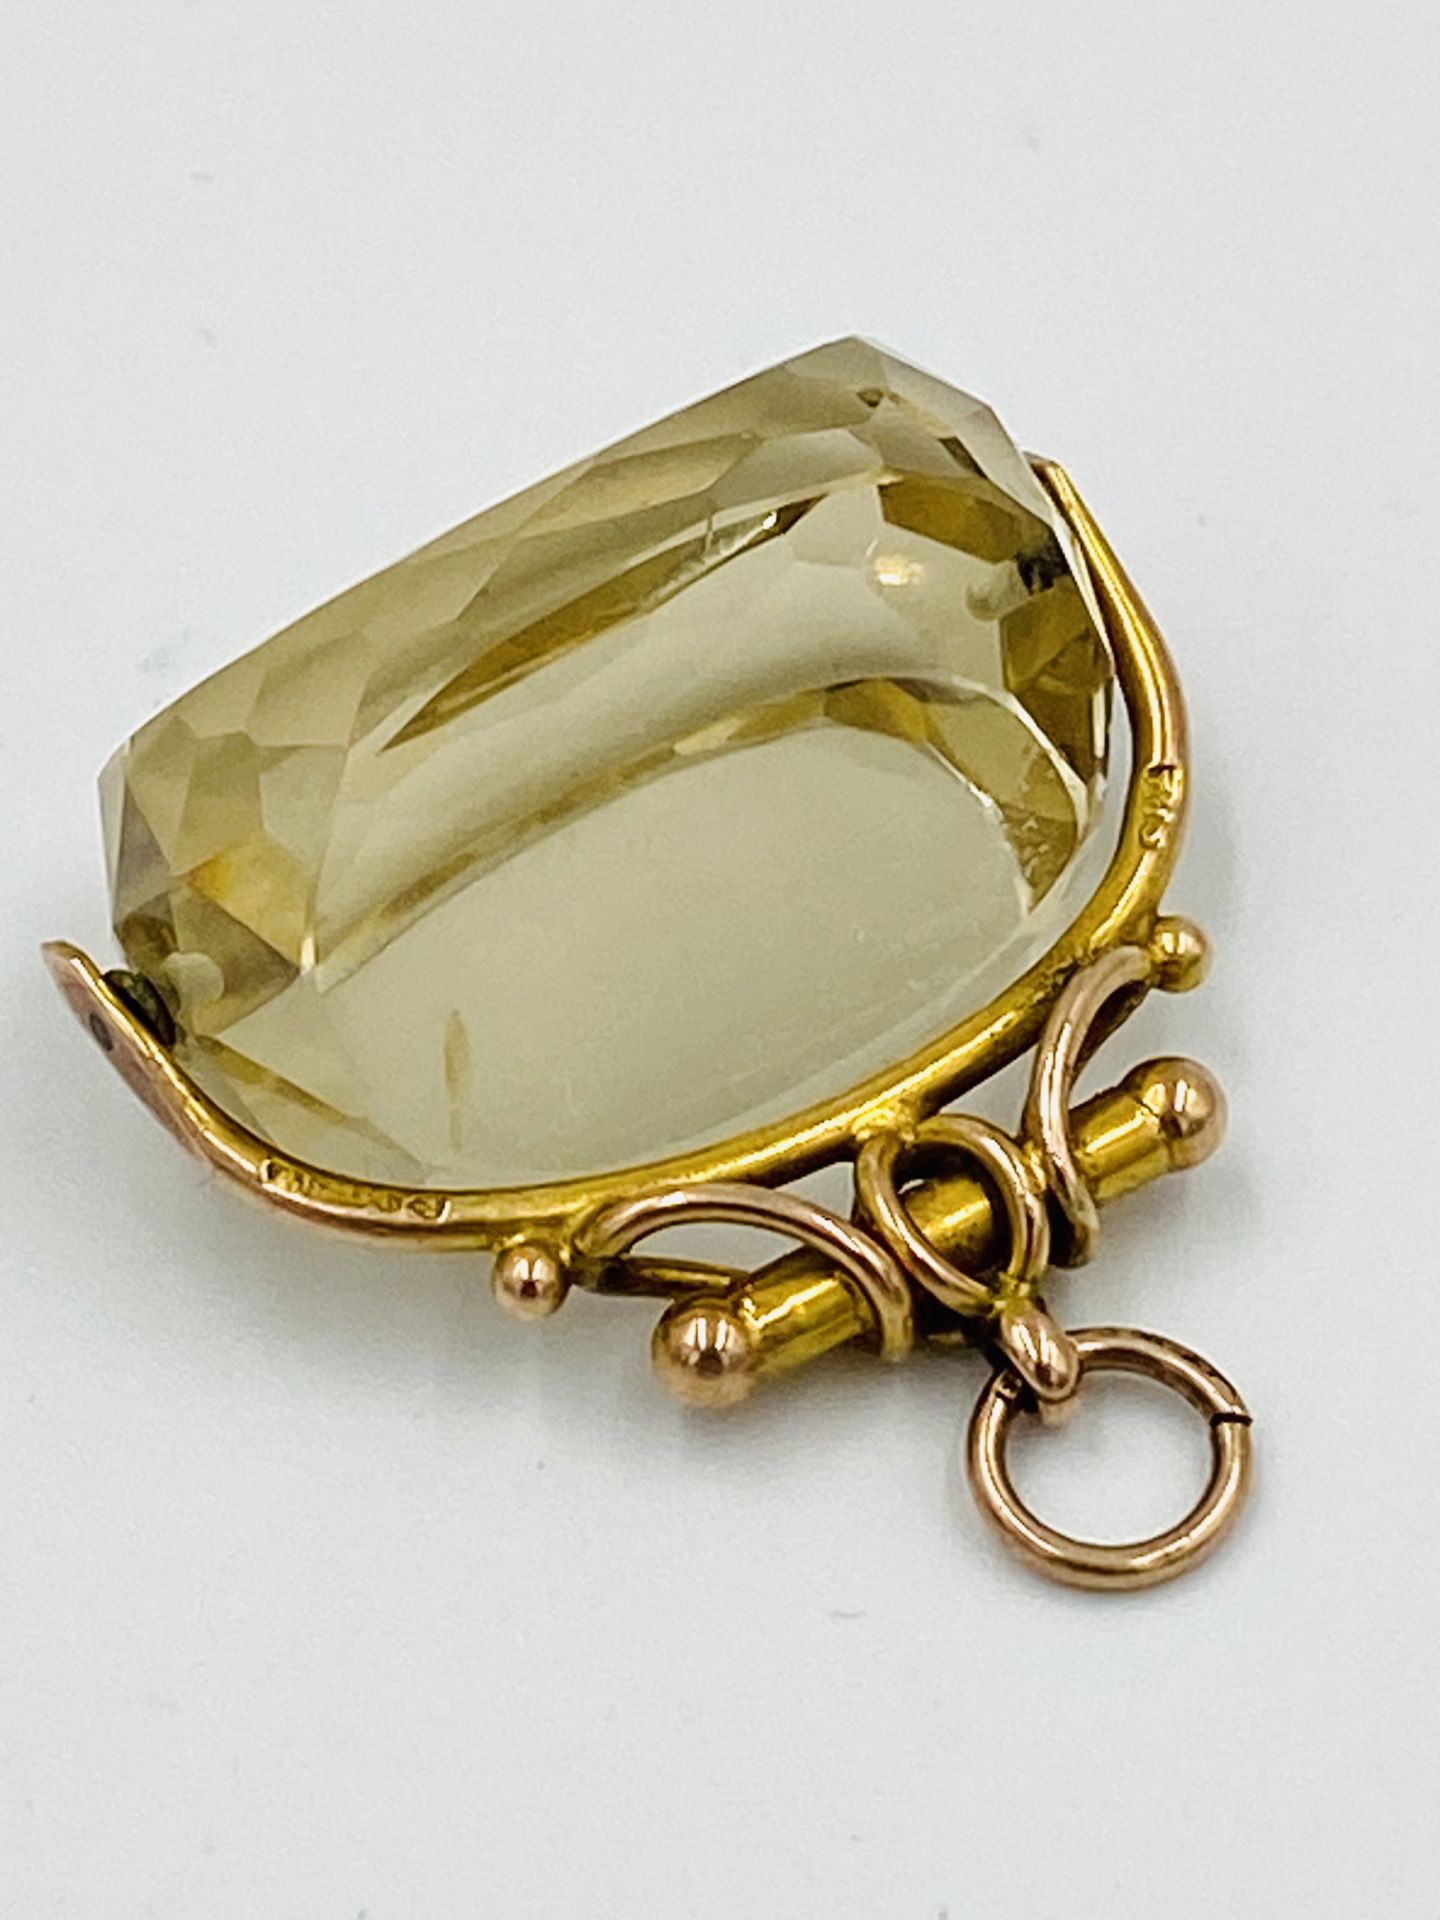 9ct gold and citron fob - Image 3 of 3